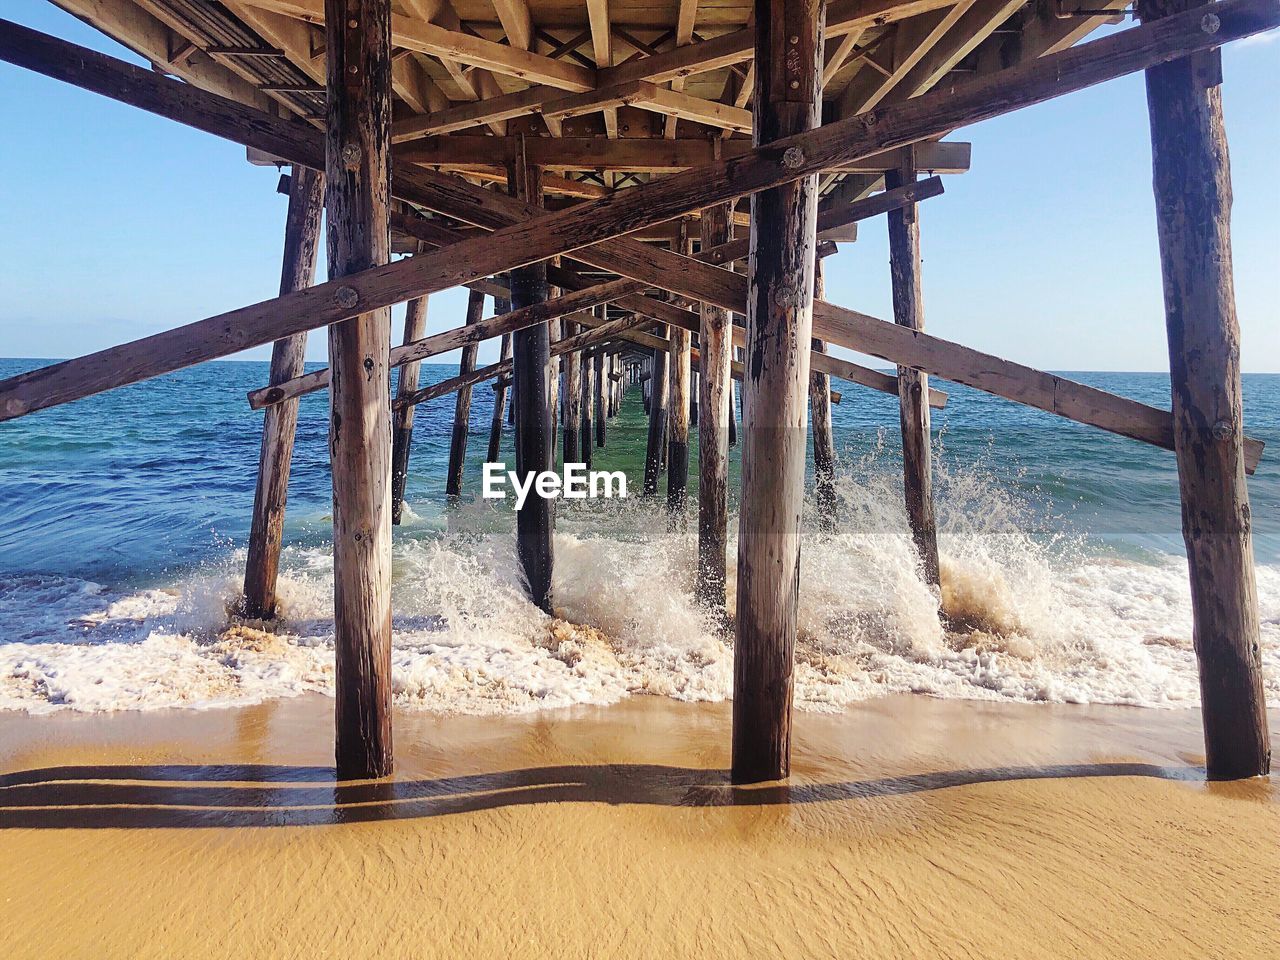 VIEW OF PIER ON BEACH